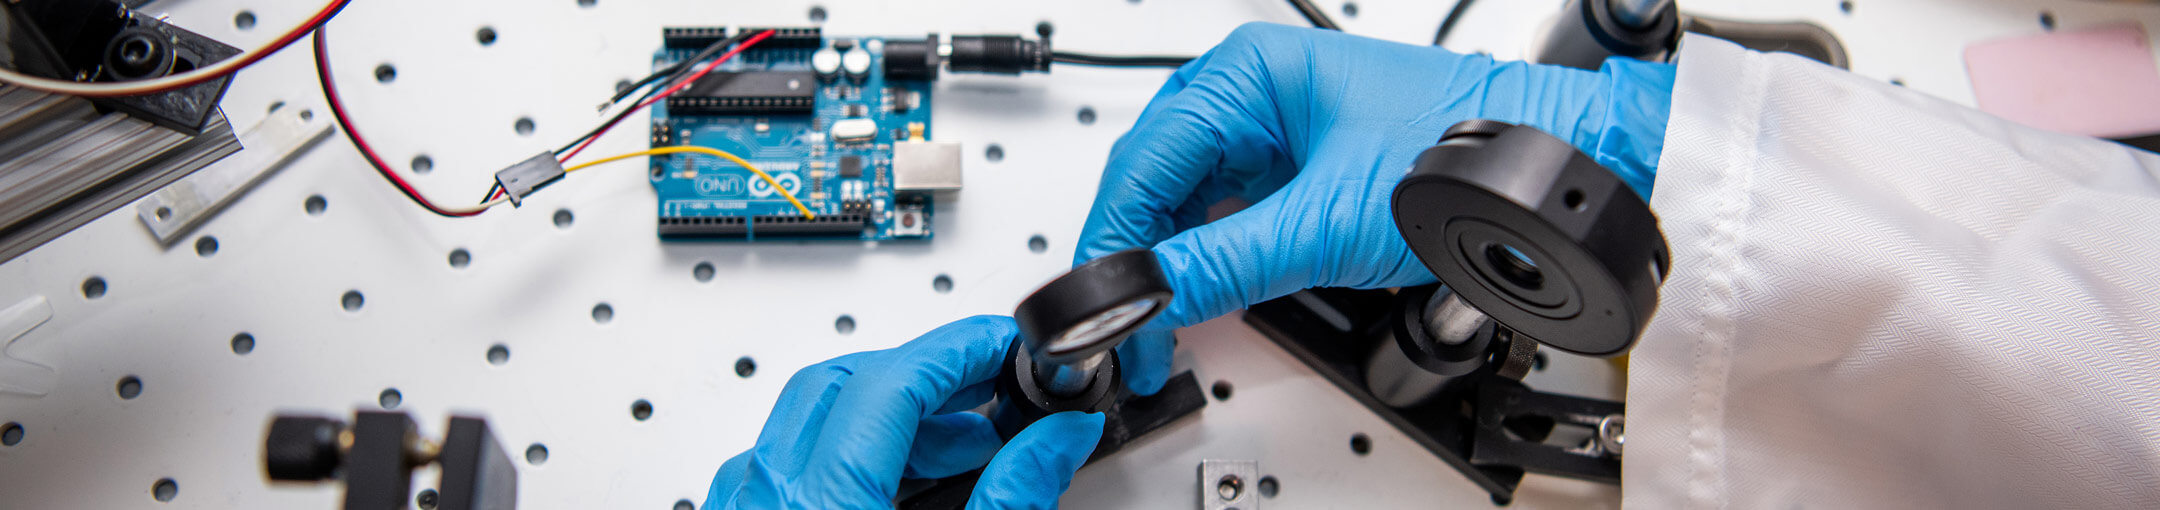 A close up of a researcher's hands adjusting a sensor on a work bench.